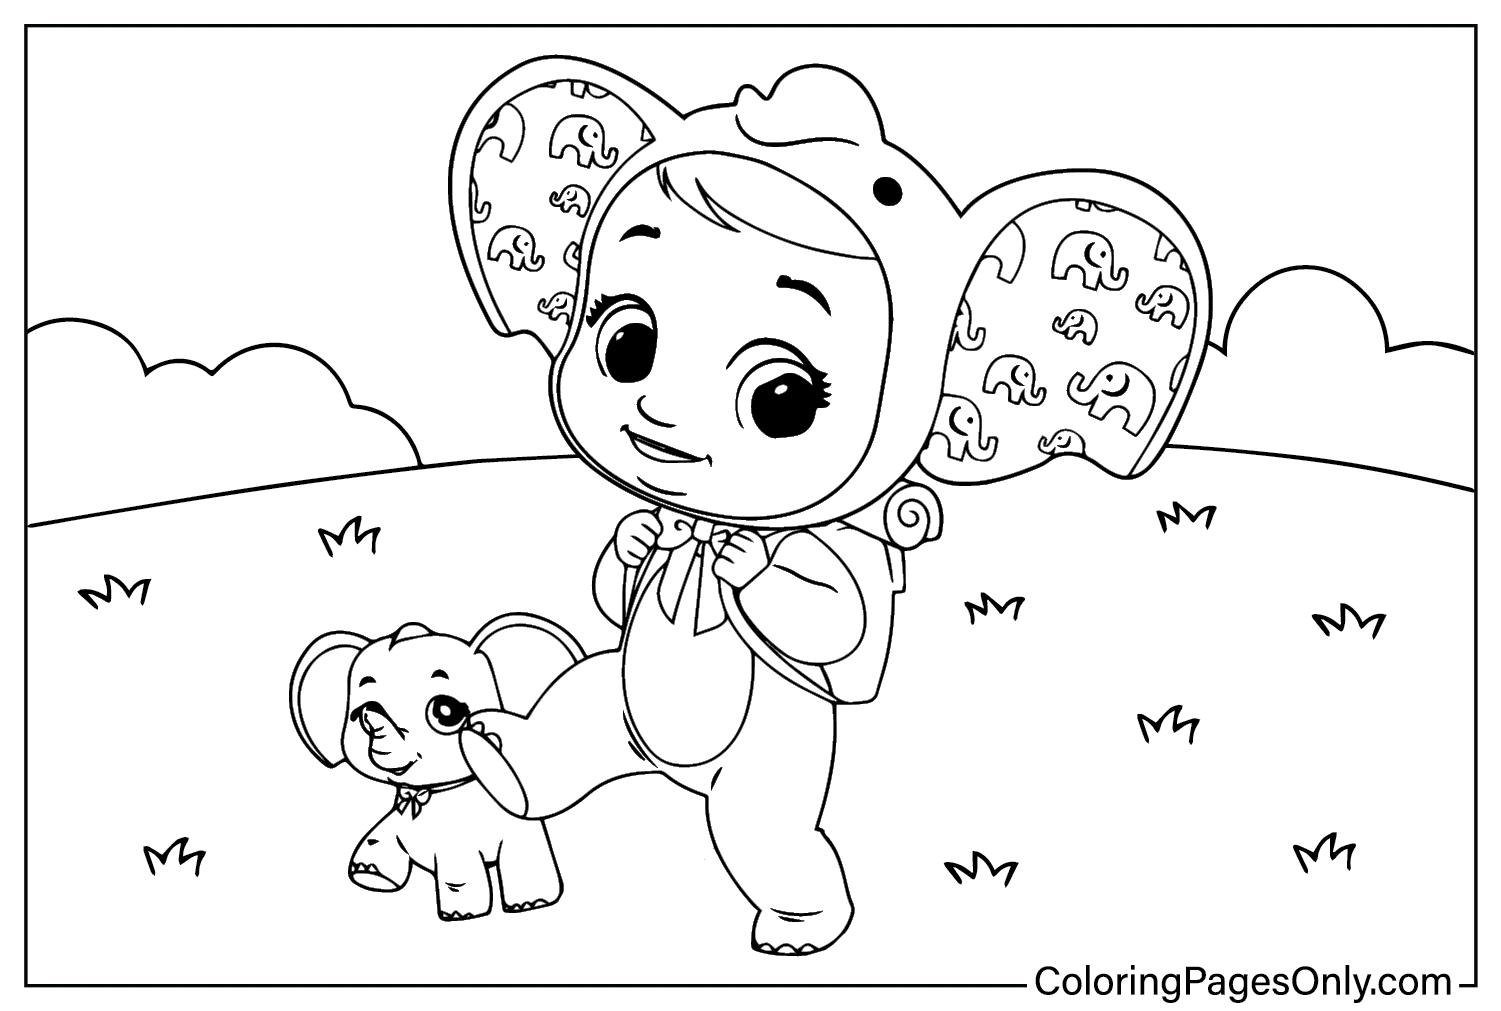 Coloring Page Cry Babies from Cry Babies